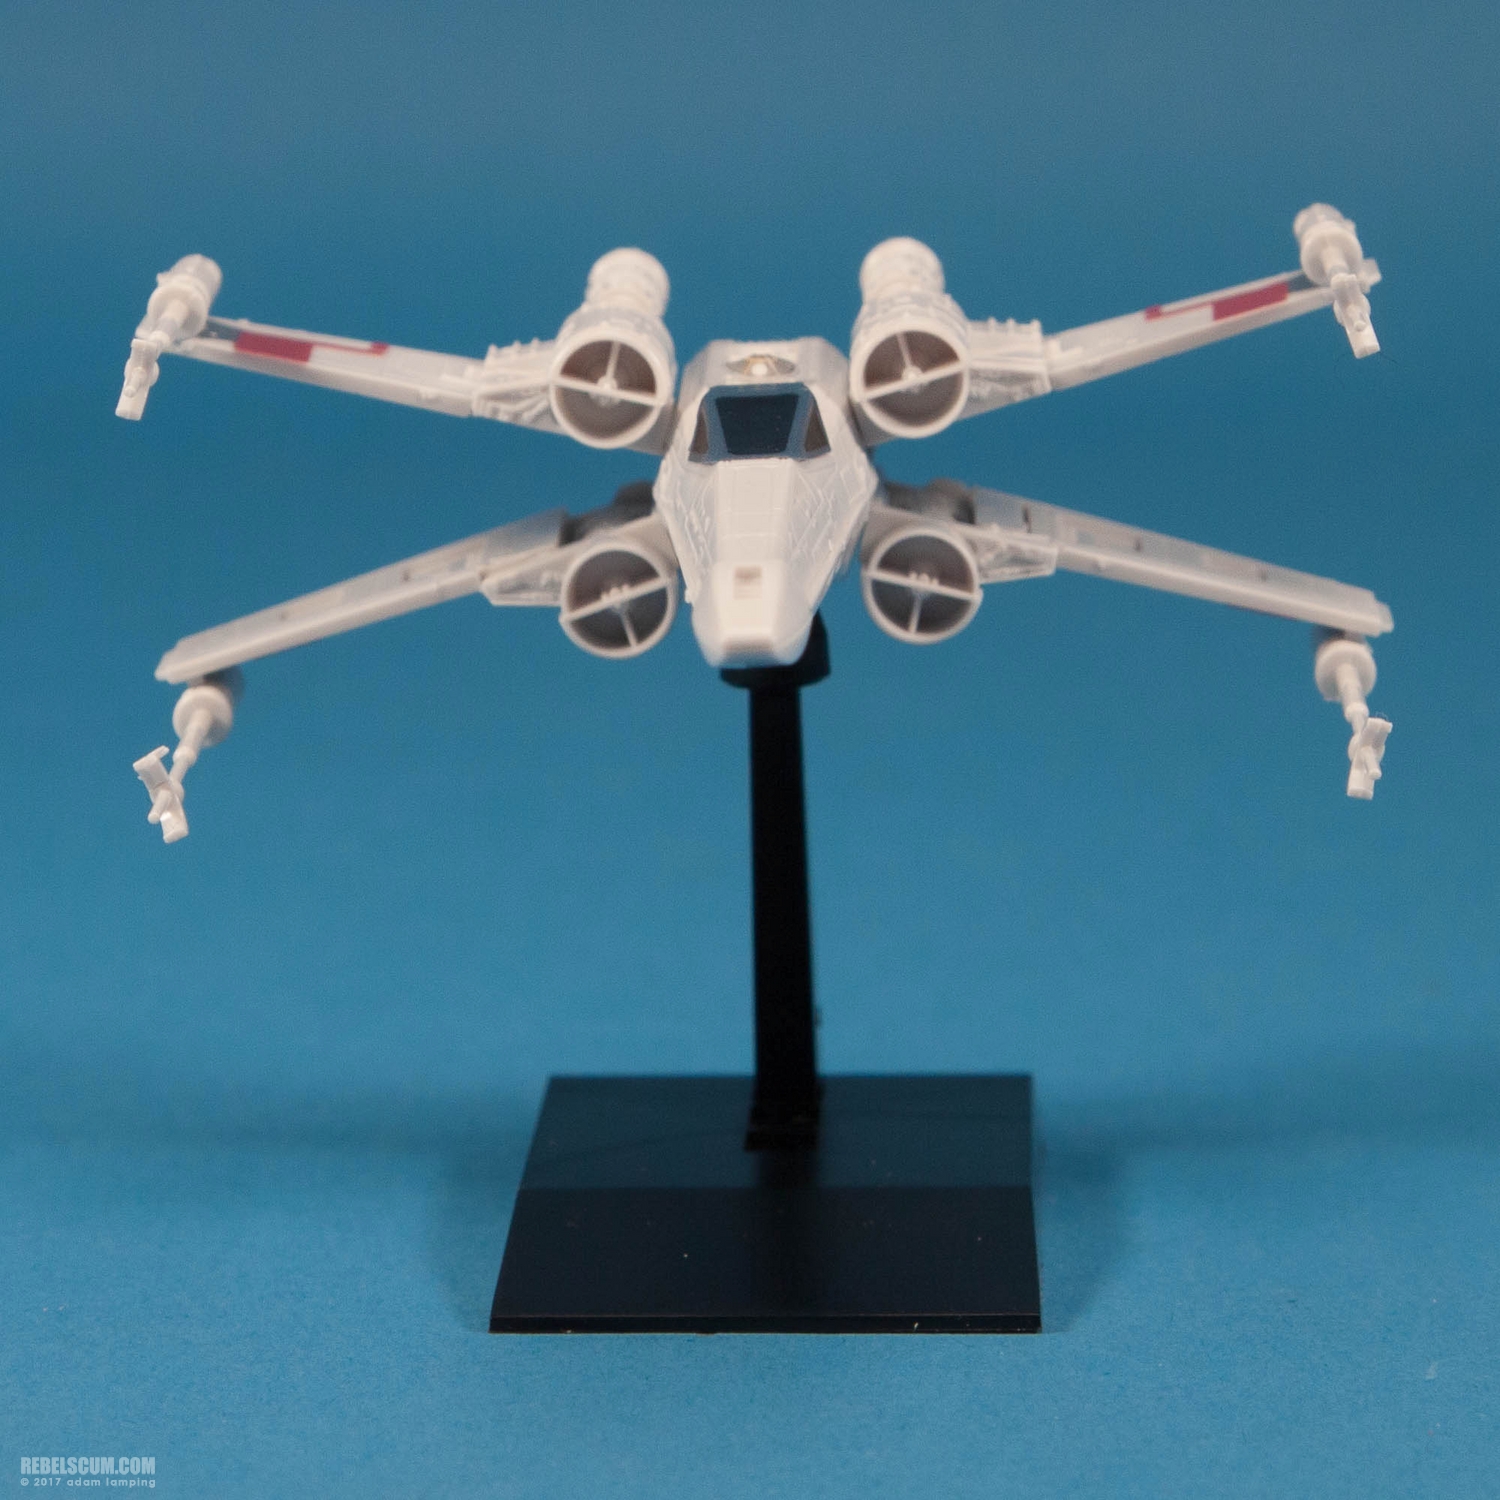 bandai-red-squadron-x-wing-starfighter-scale-model-kit-013.jpg